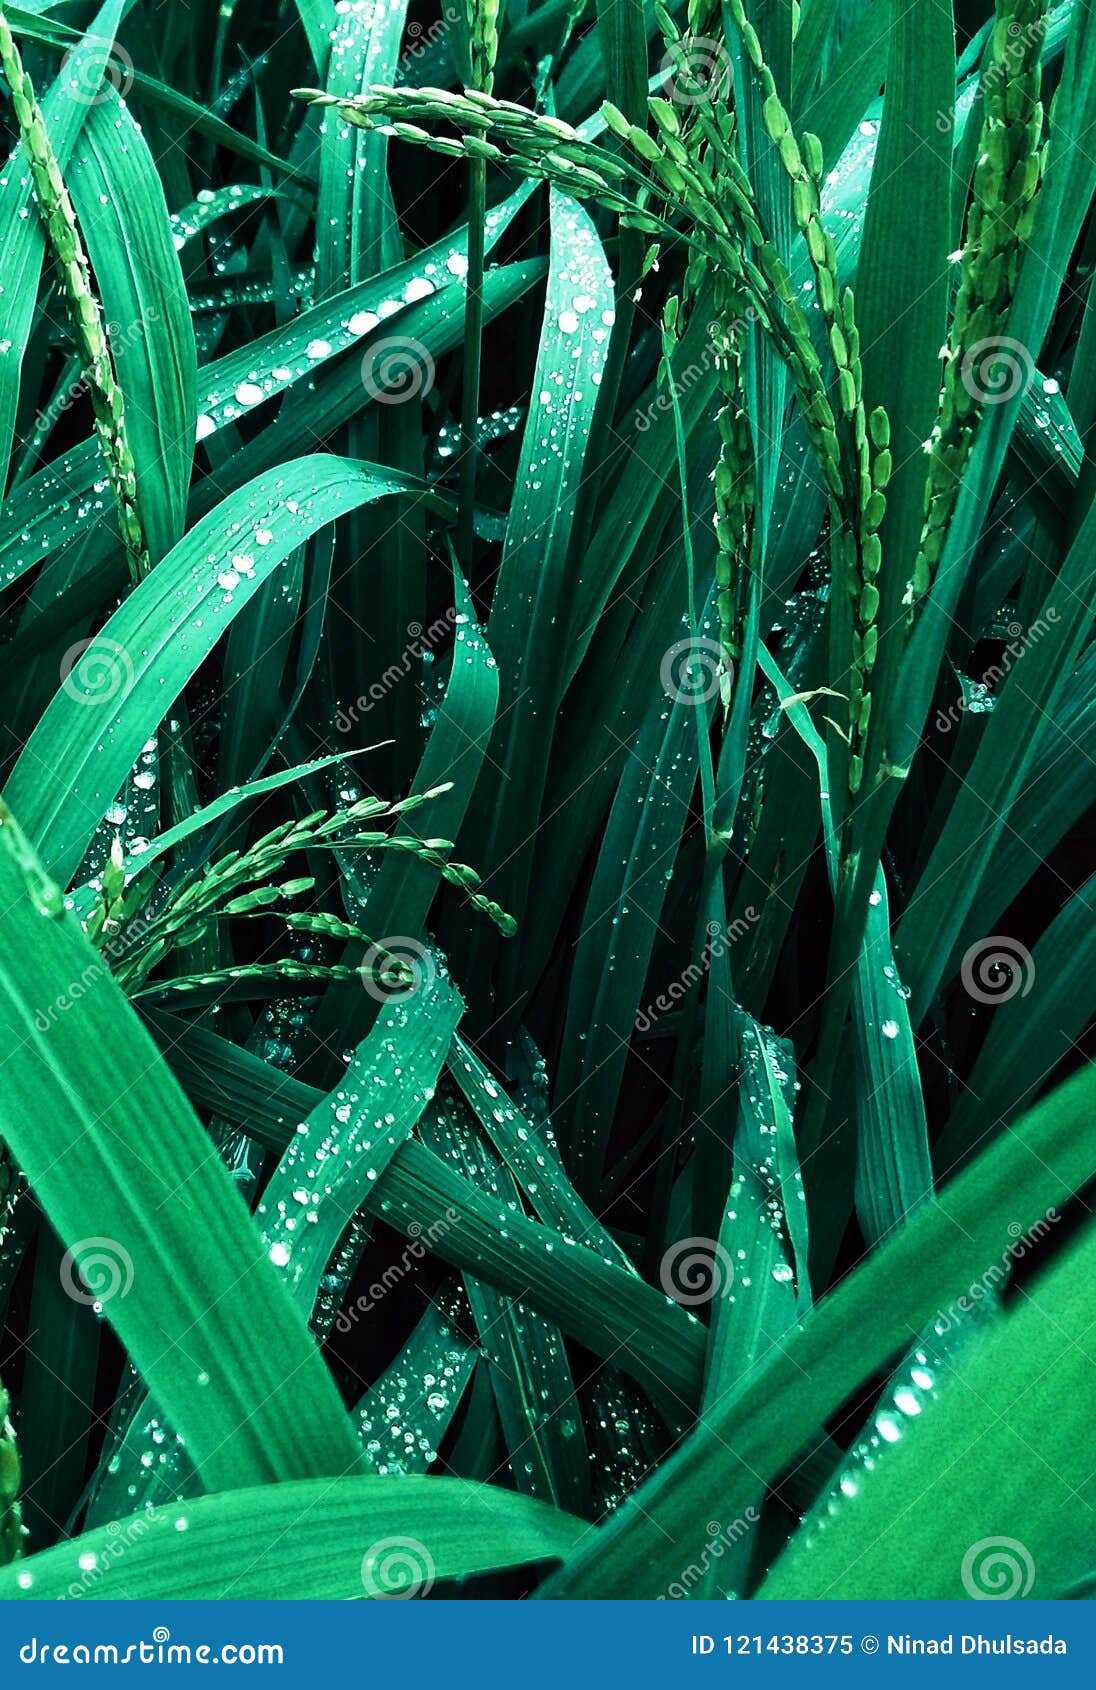 RICE CROP IN FIELDS WITH DROPLETS. RICE CROP IN FIELDS IN MONSOON SEASON RICE GRAINS DROPLETS BACKGROUND NATURE